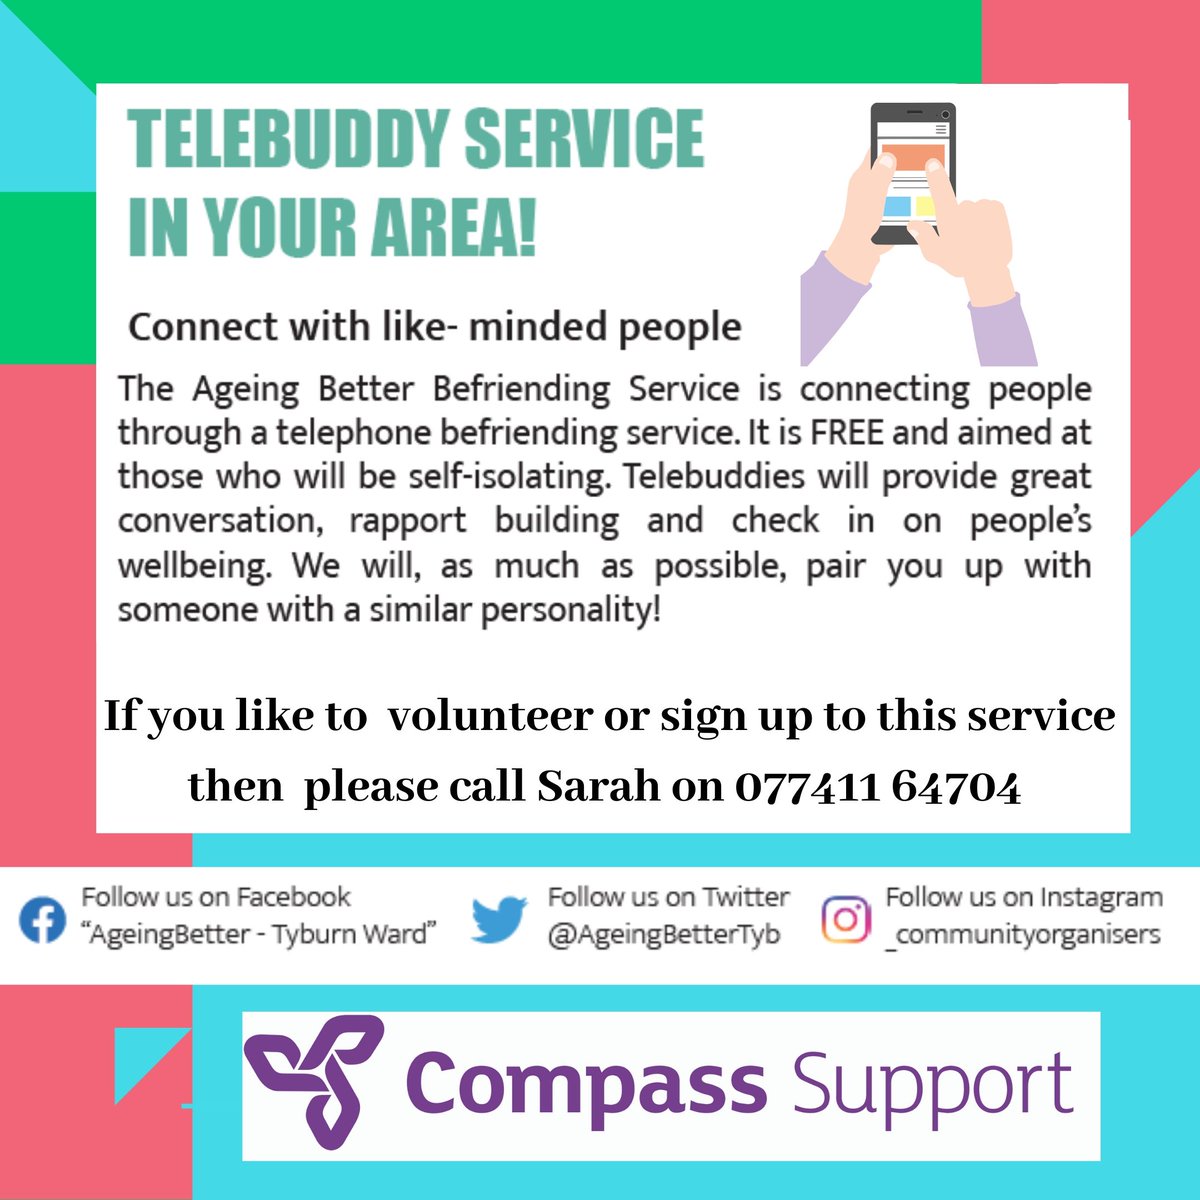 Due to COVID-19 we launched our brilliant Telebuddy service. Contact Sarah today on 077411 64704  to see how you can get involved.
#volunteersweek 
#Brumvolunteers